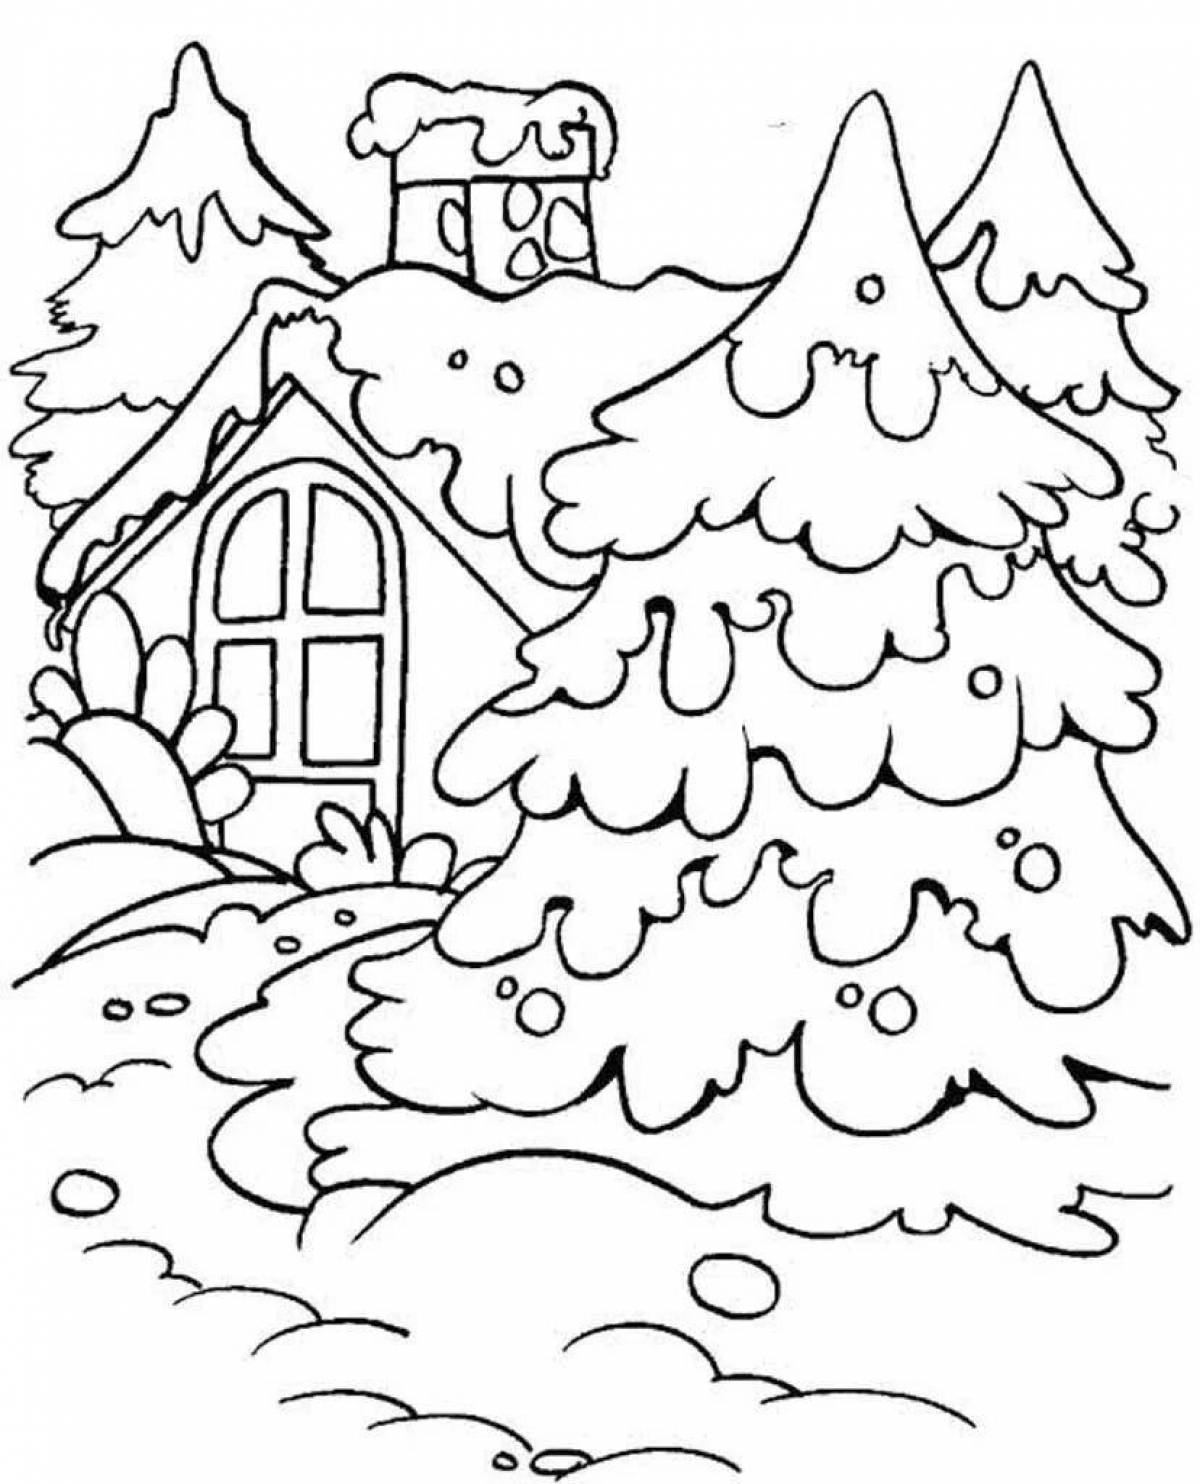 Impressive coloring drawing winter